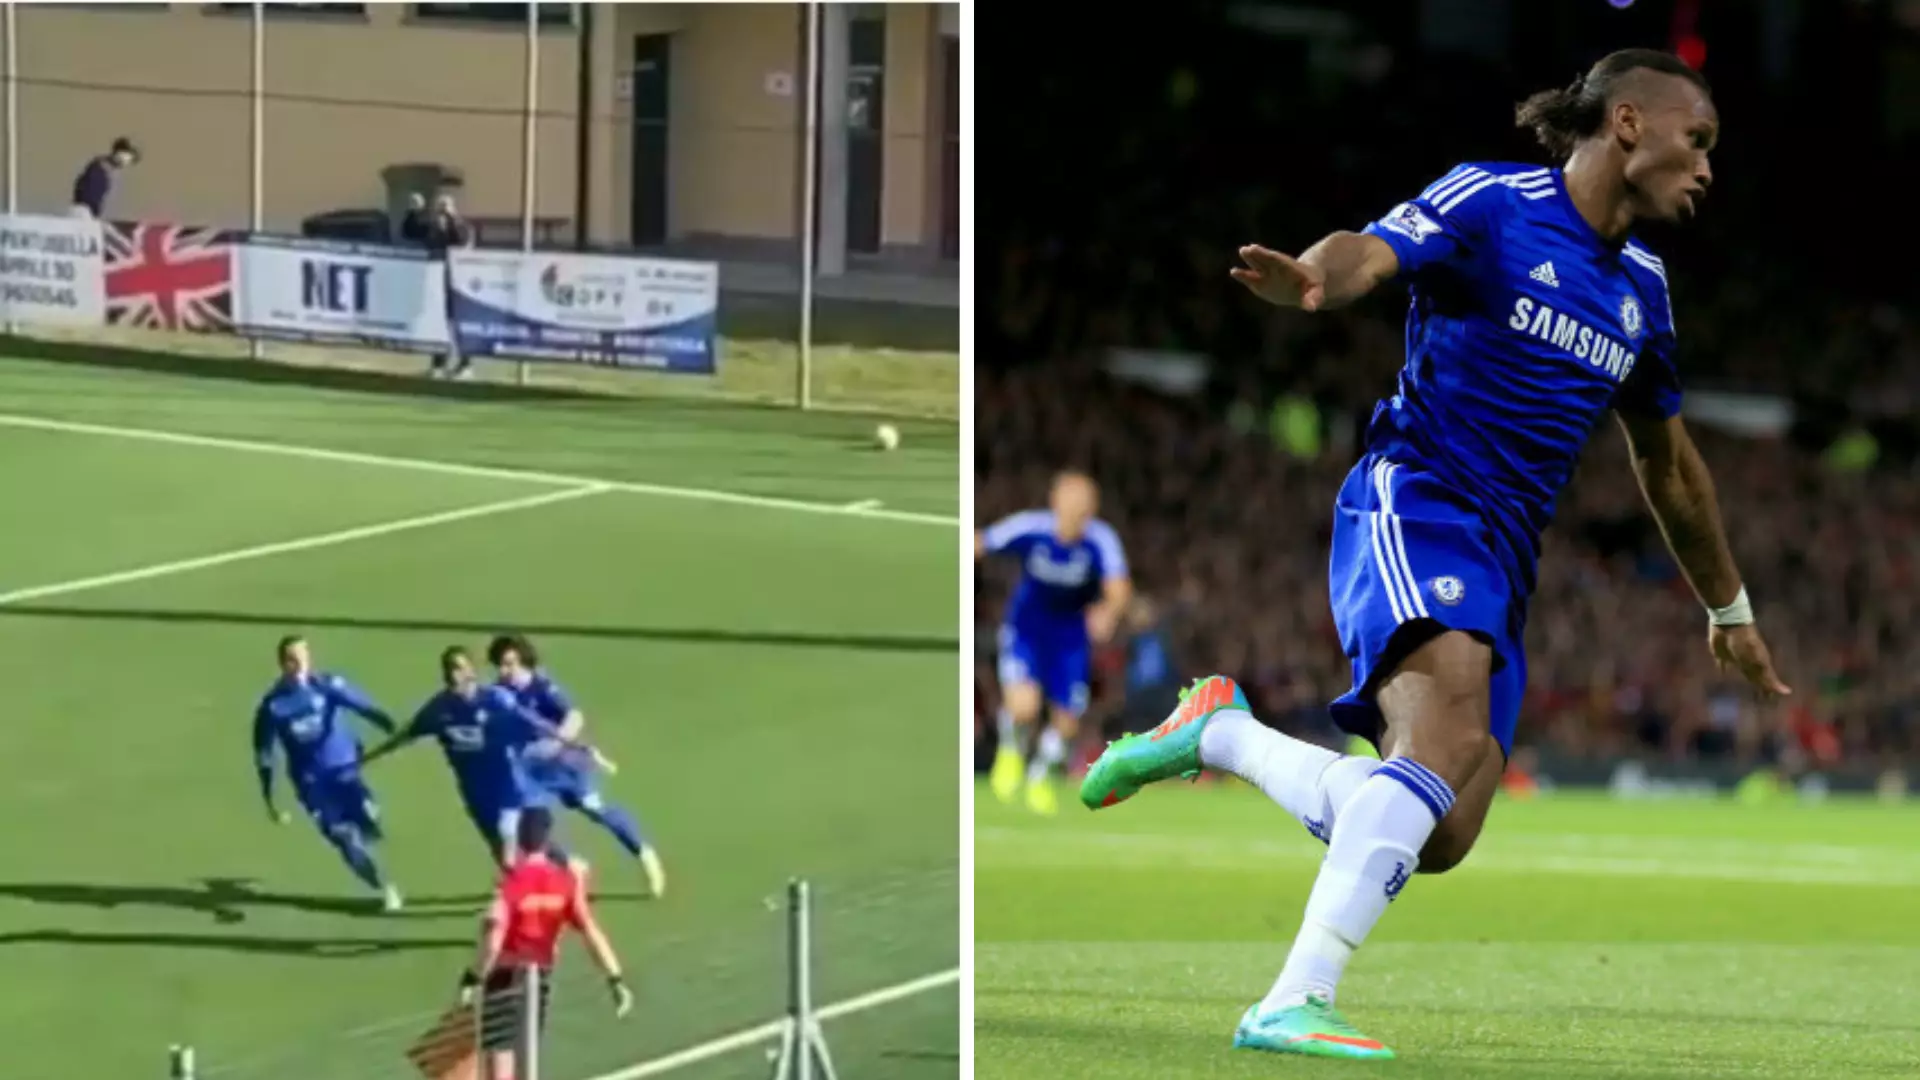 Didier Drogba's Son Scores First Pro Goal And Celebrates Just Like His Dad